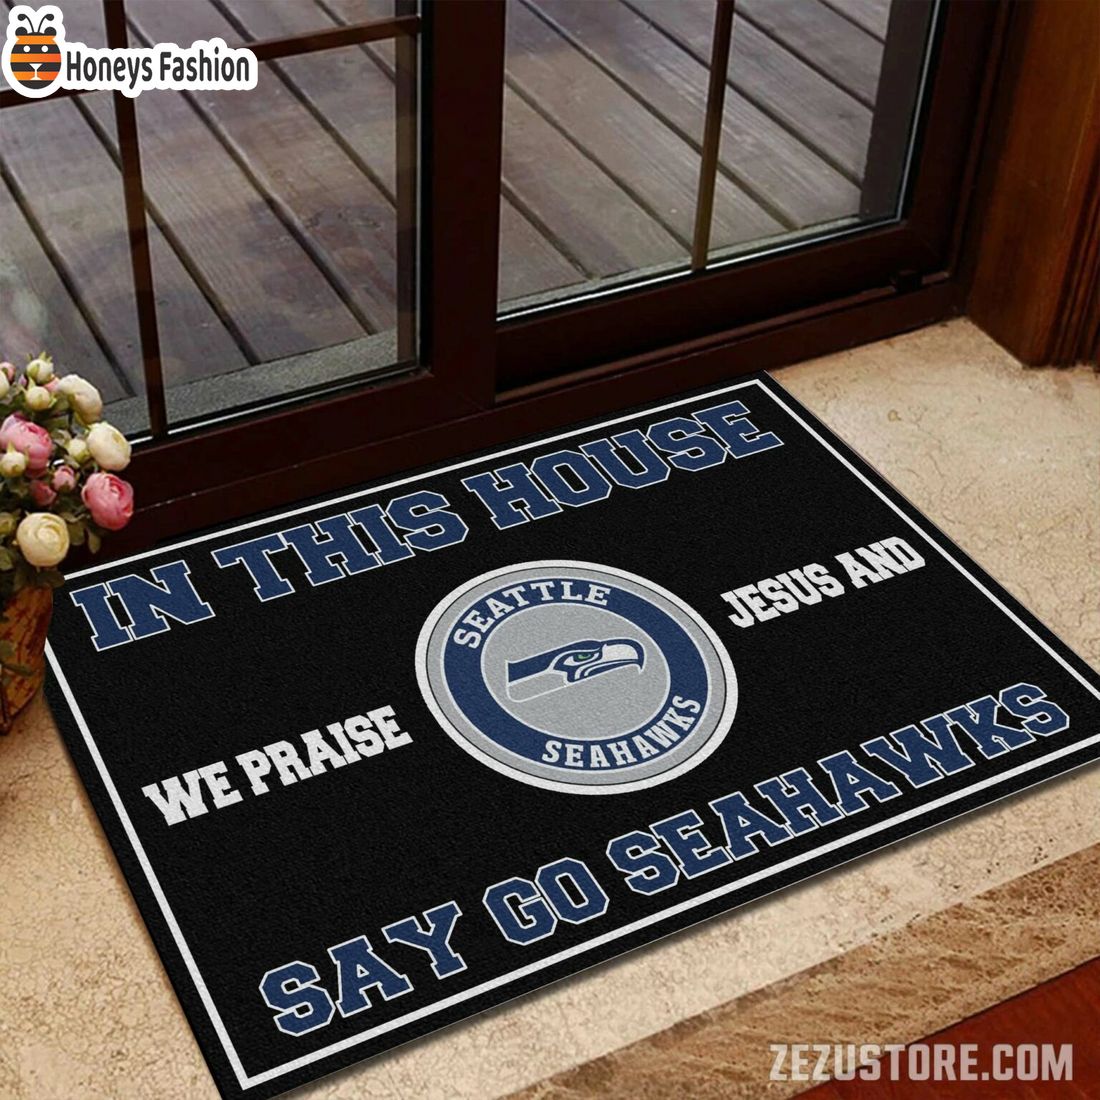 In this house we praise jesus and say go Seahawks doormat